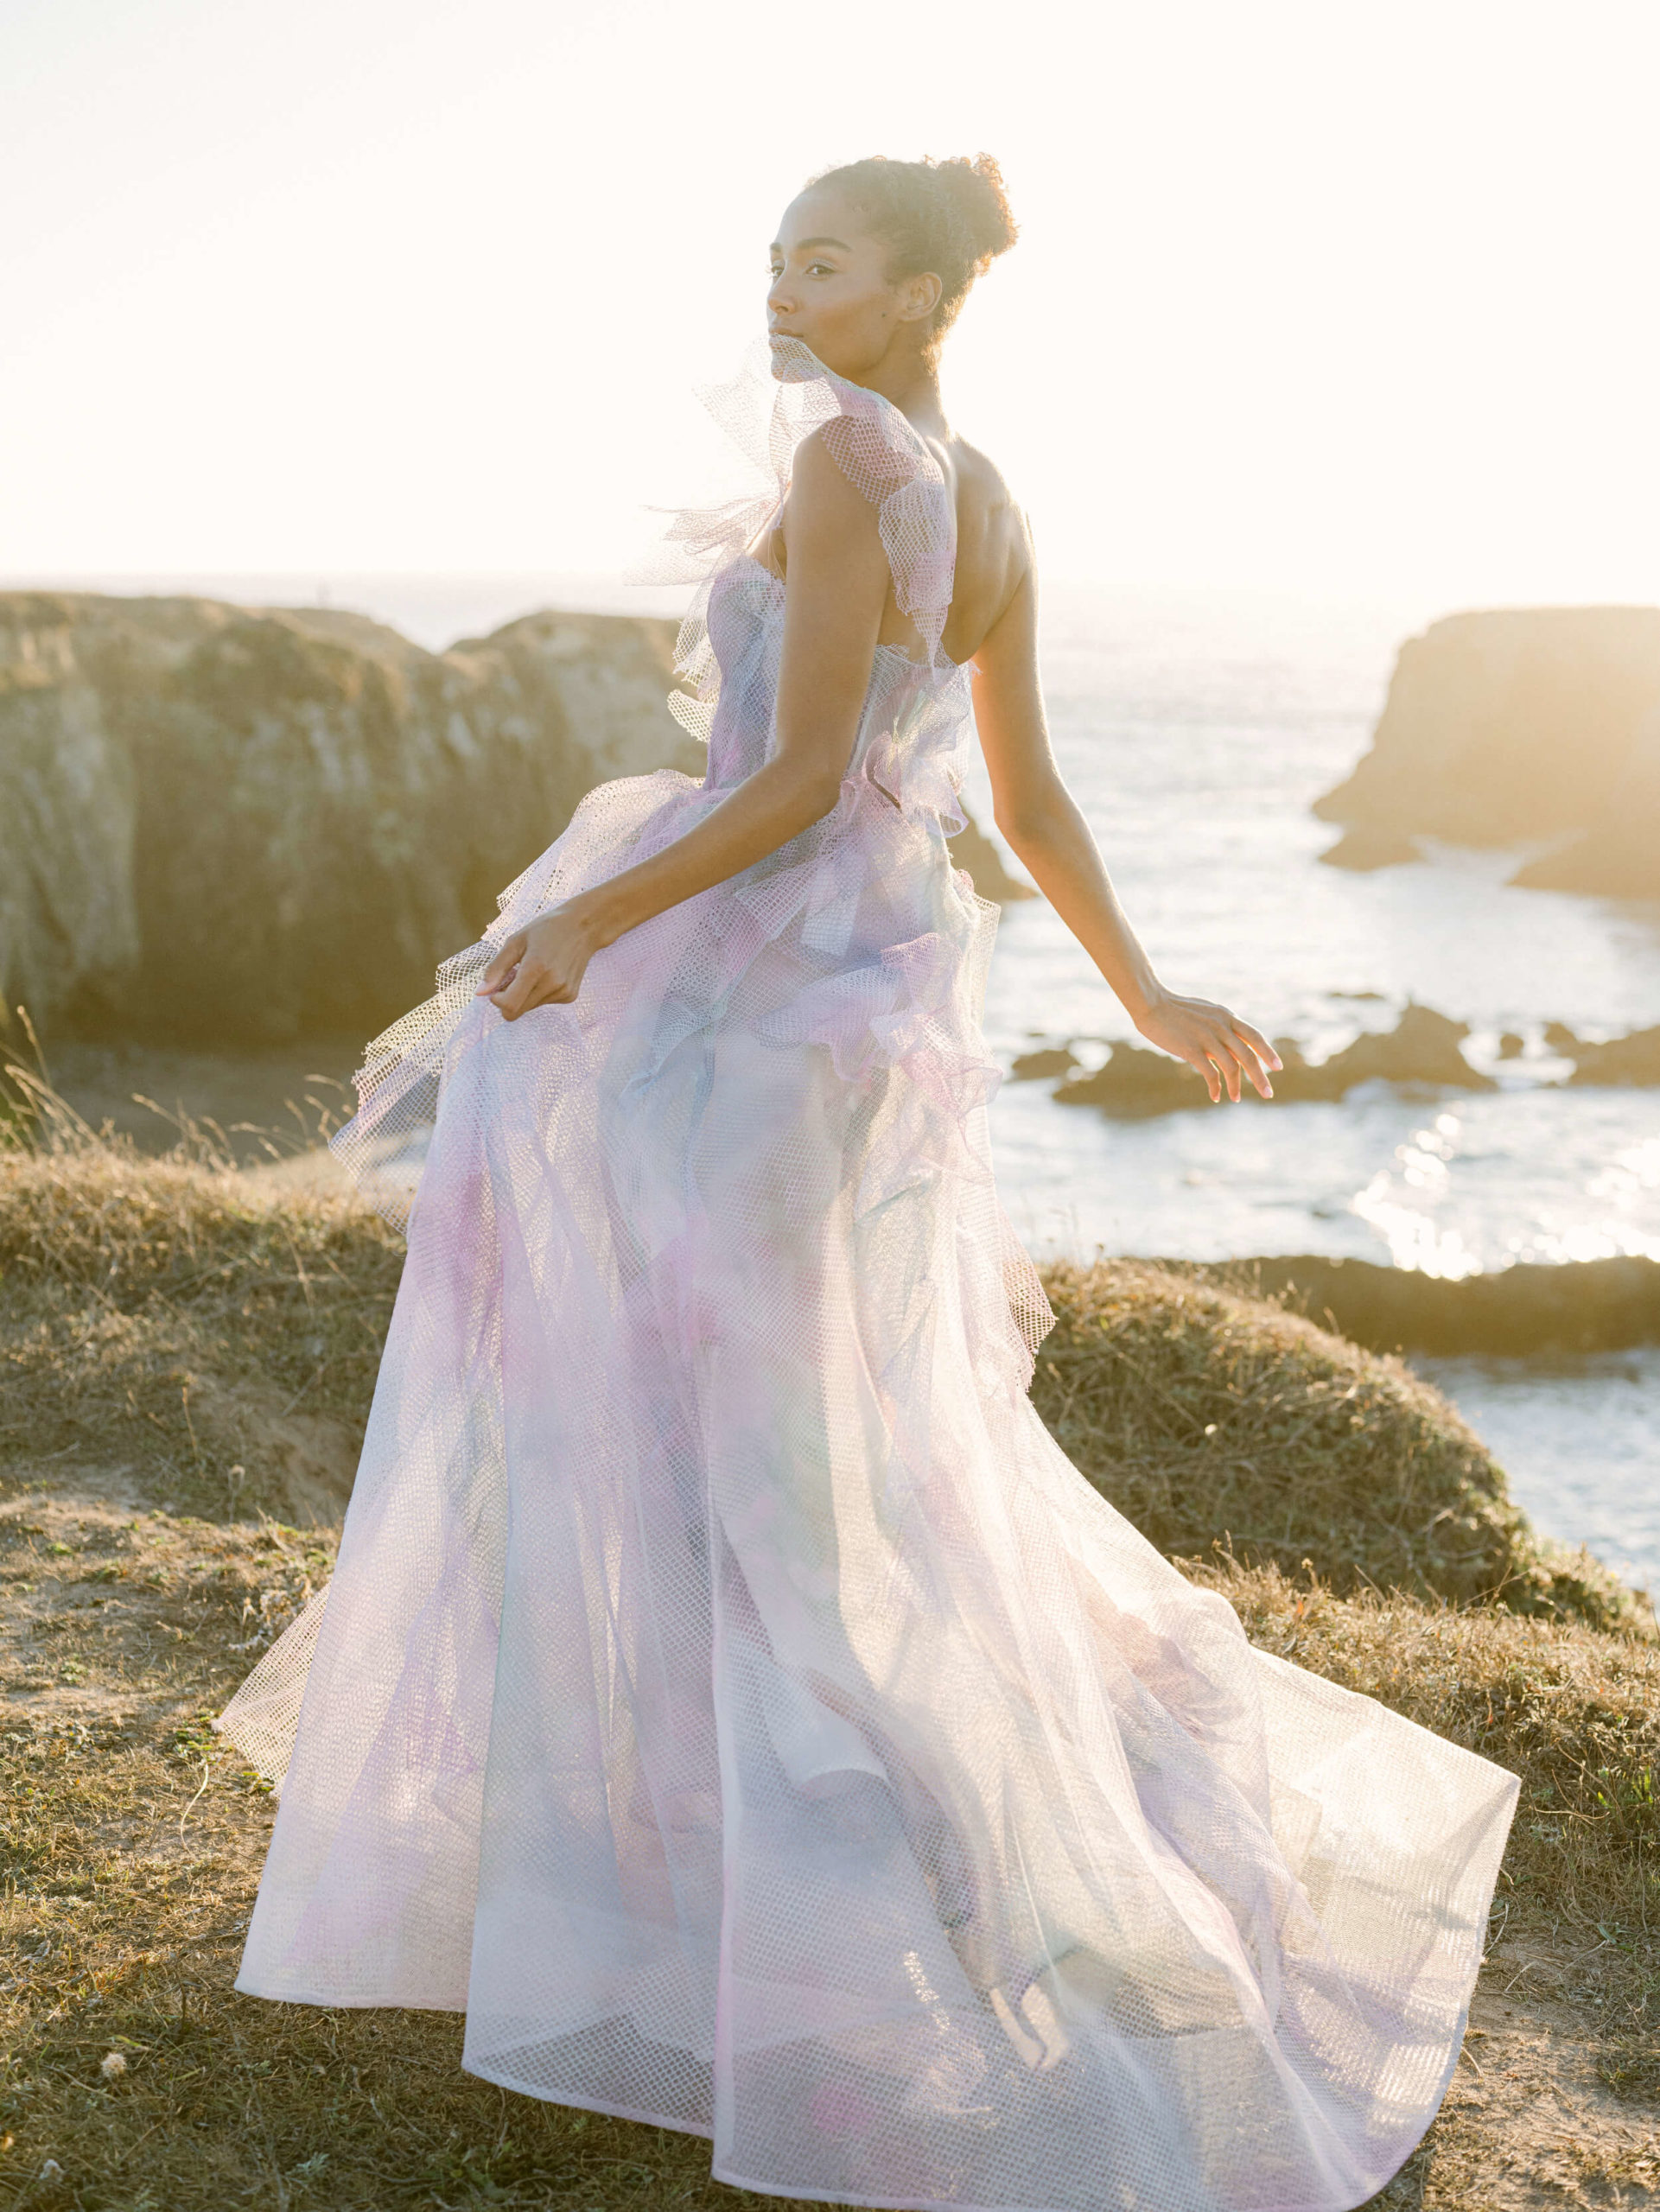 Marchesa Spring gown shot by KT Merry